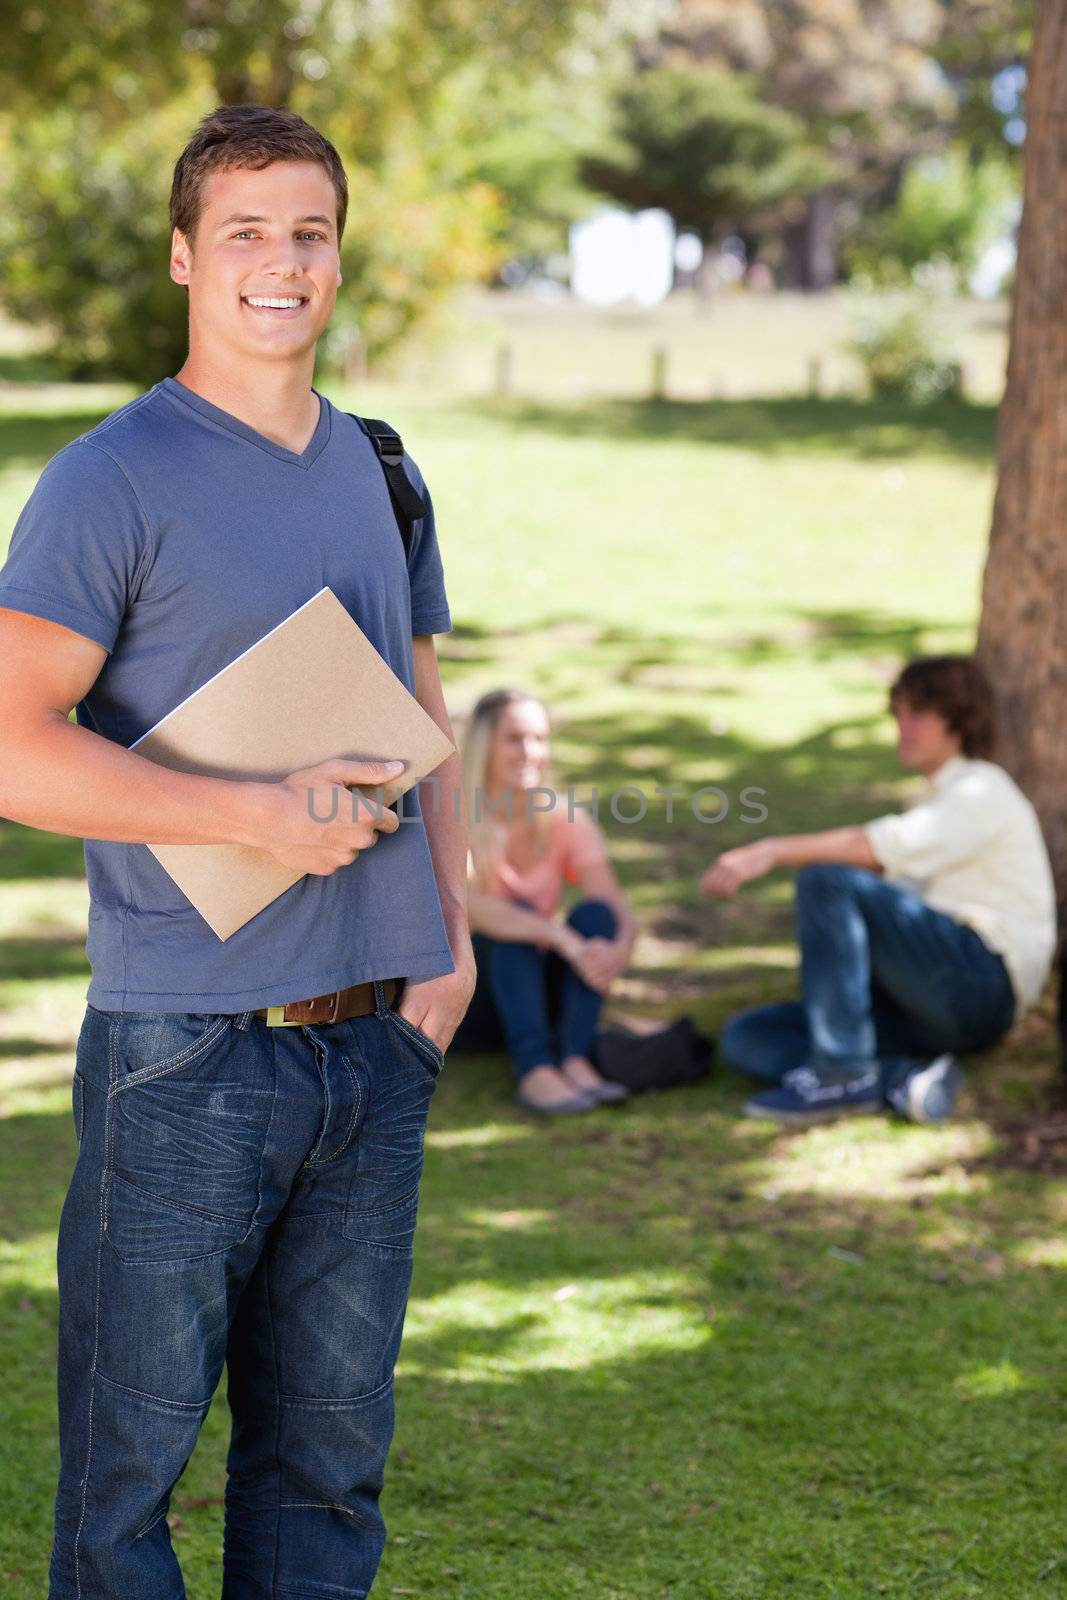 Student smiling while holding a textbook in a park with friends in background